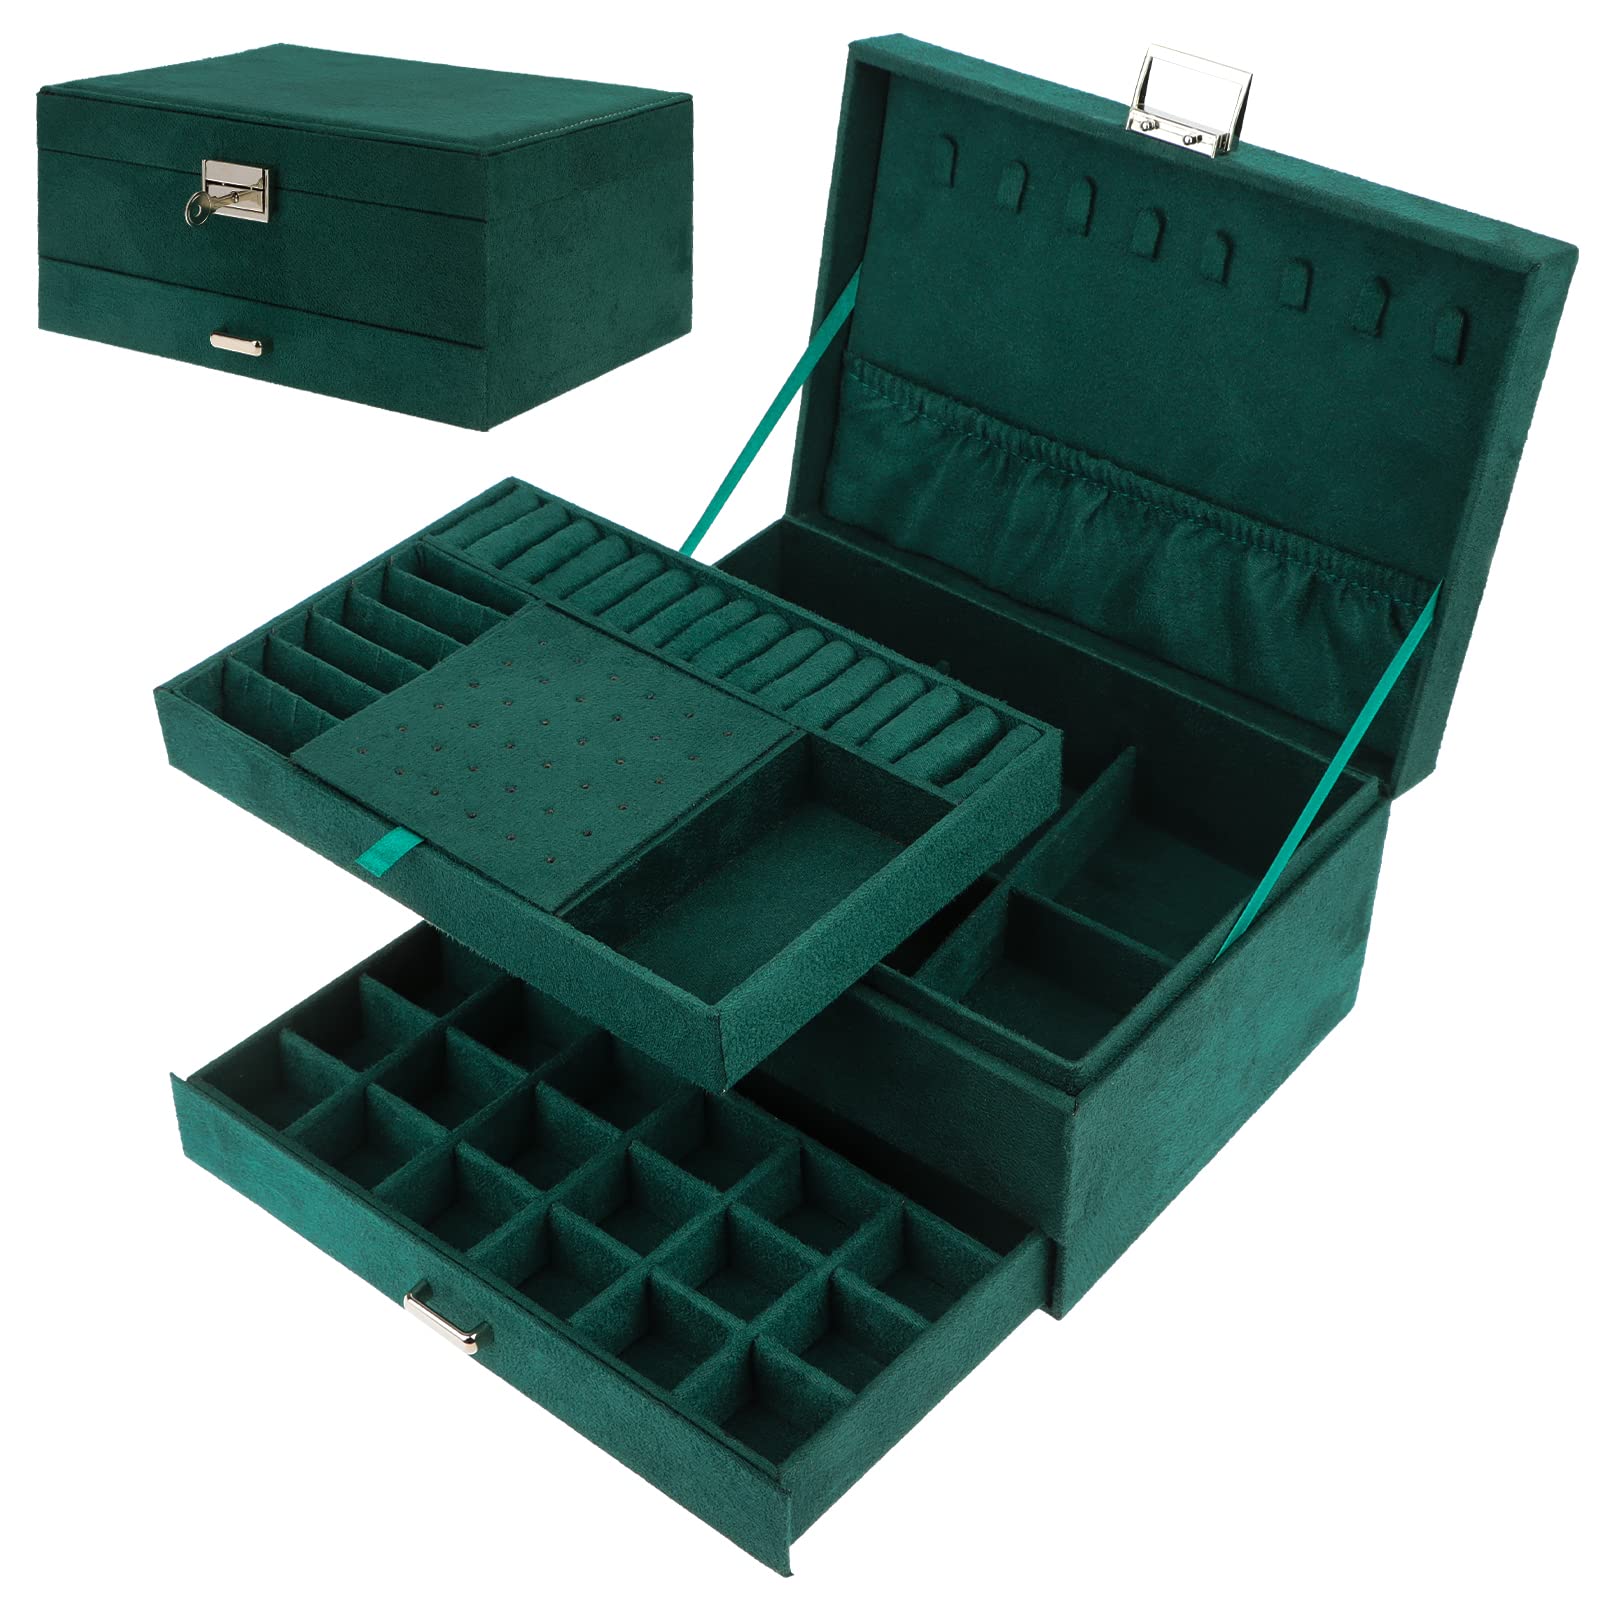 Vintage Green Flannel Jewelry Box for Women Girls, 3-Layer Large Capacity Retro Velvet Jewelry Organiser Storage Case Lockable for Earrings Necklace Bracelets Rings and Watches